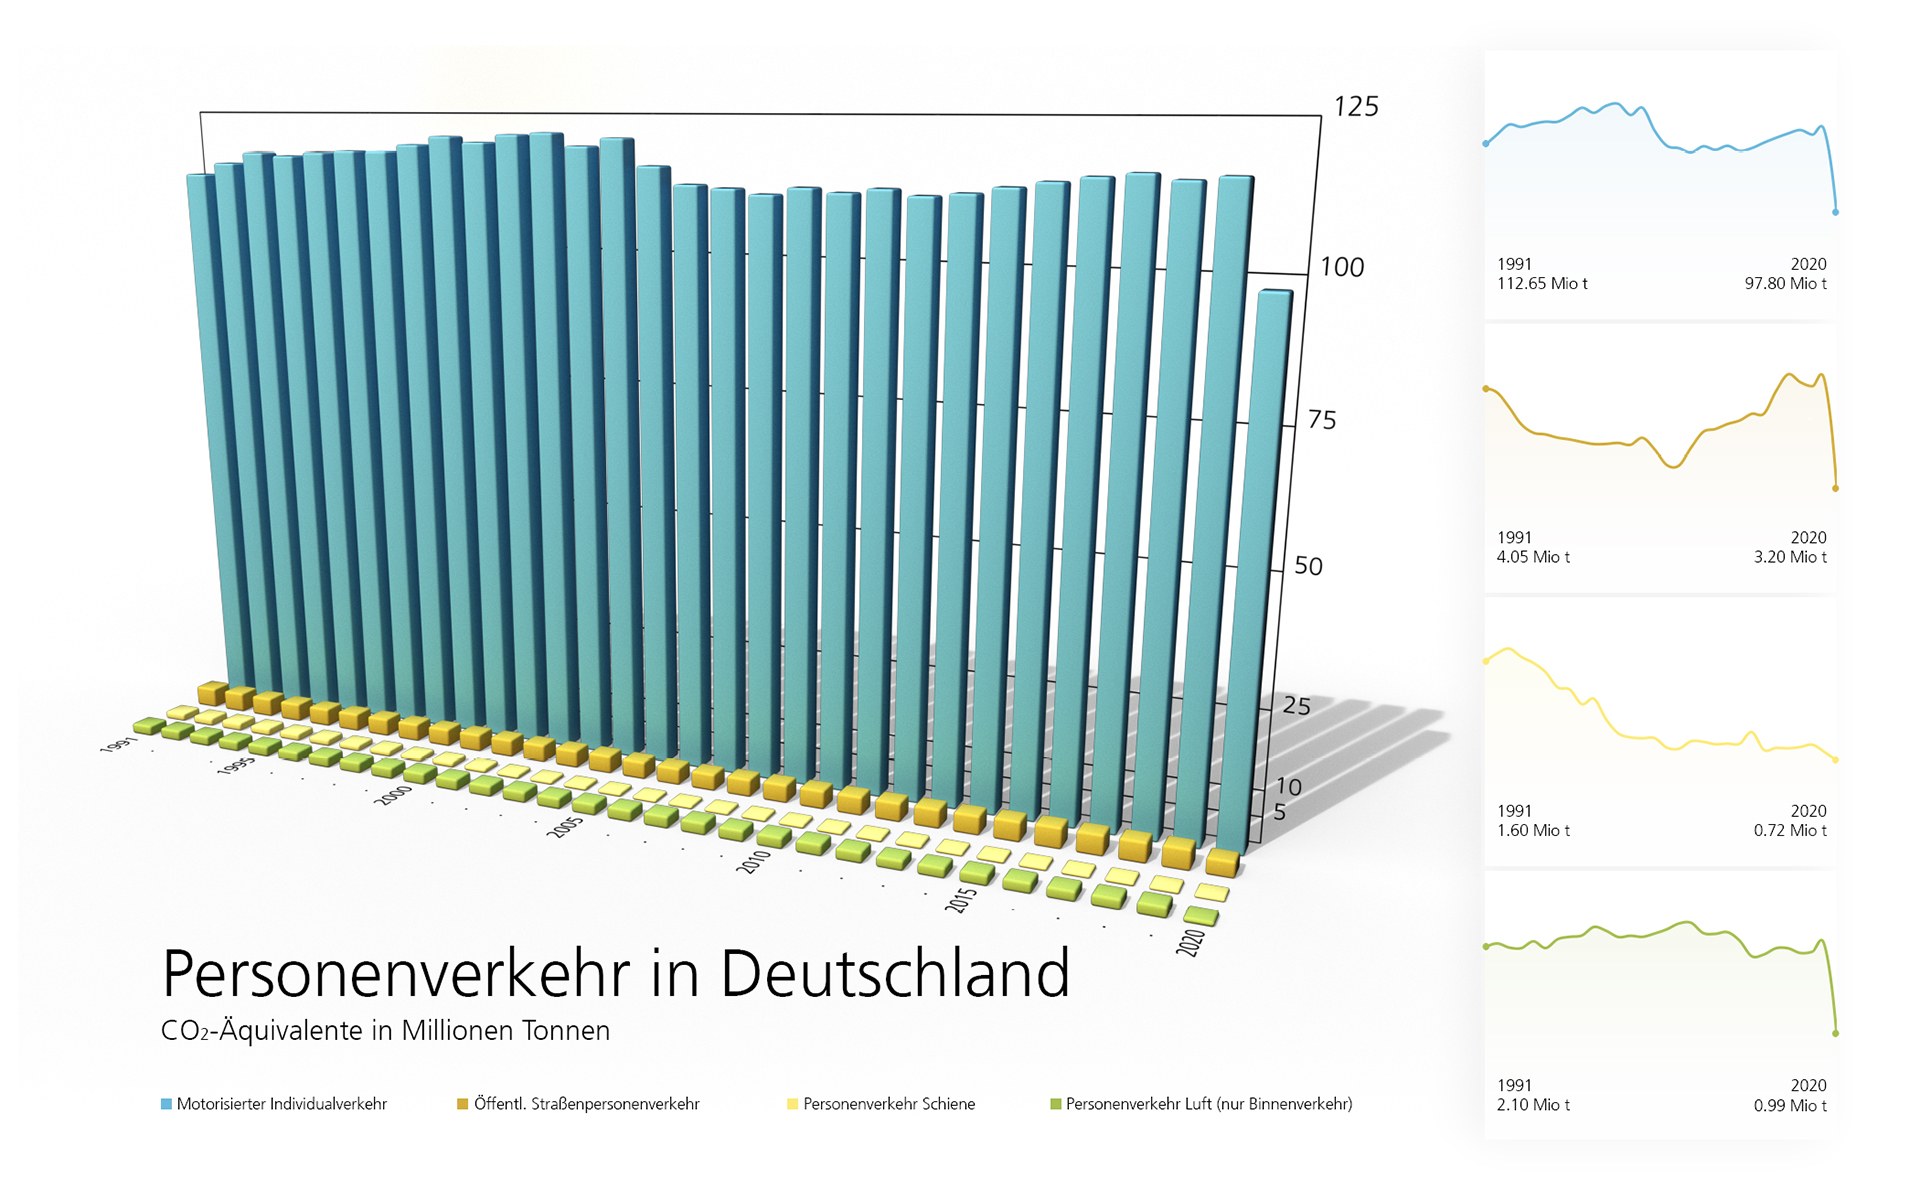 Passenger transport in Germany – carbon dioxide equivalents in millions of tonnes